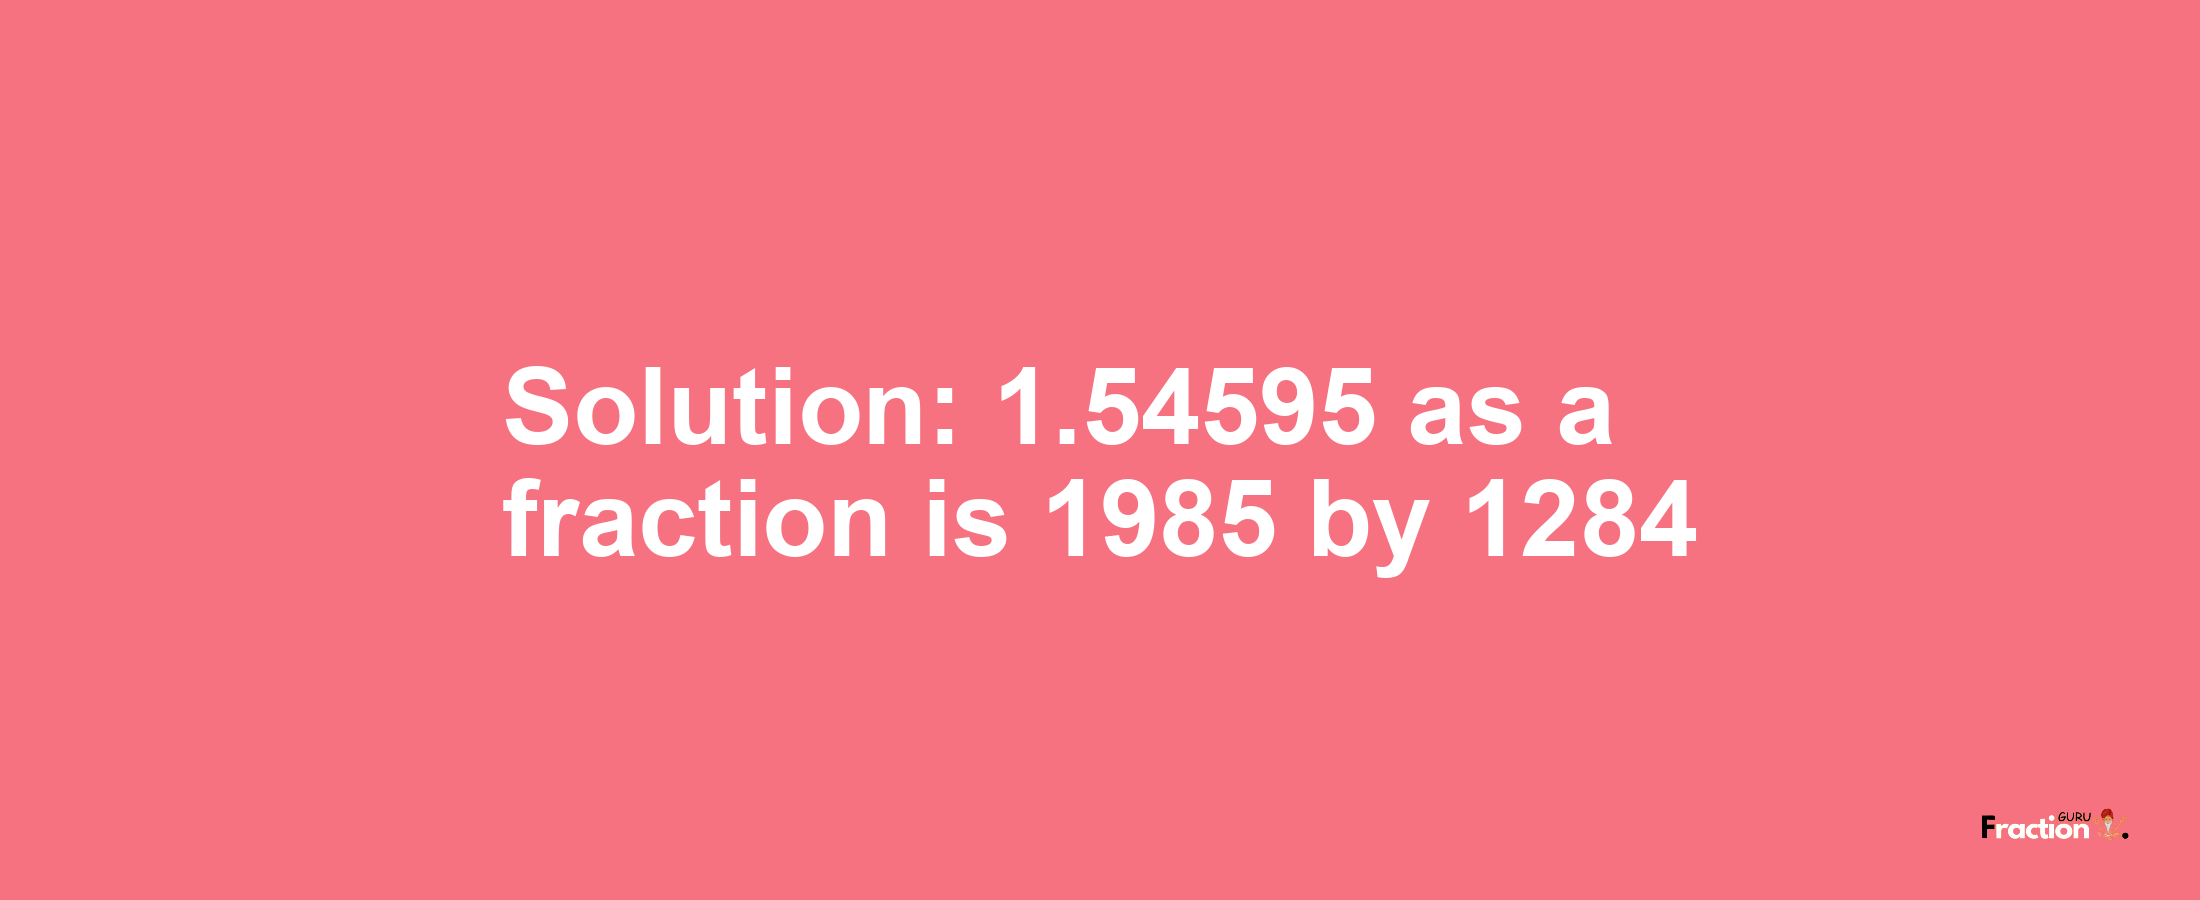 Solution:1.54595 as a fraction is 1985/1284